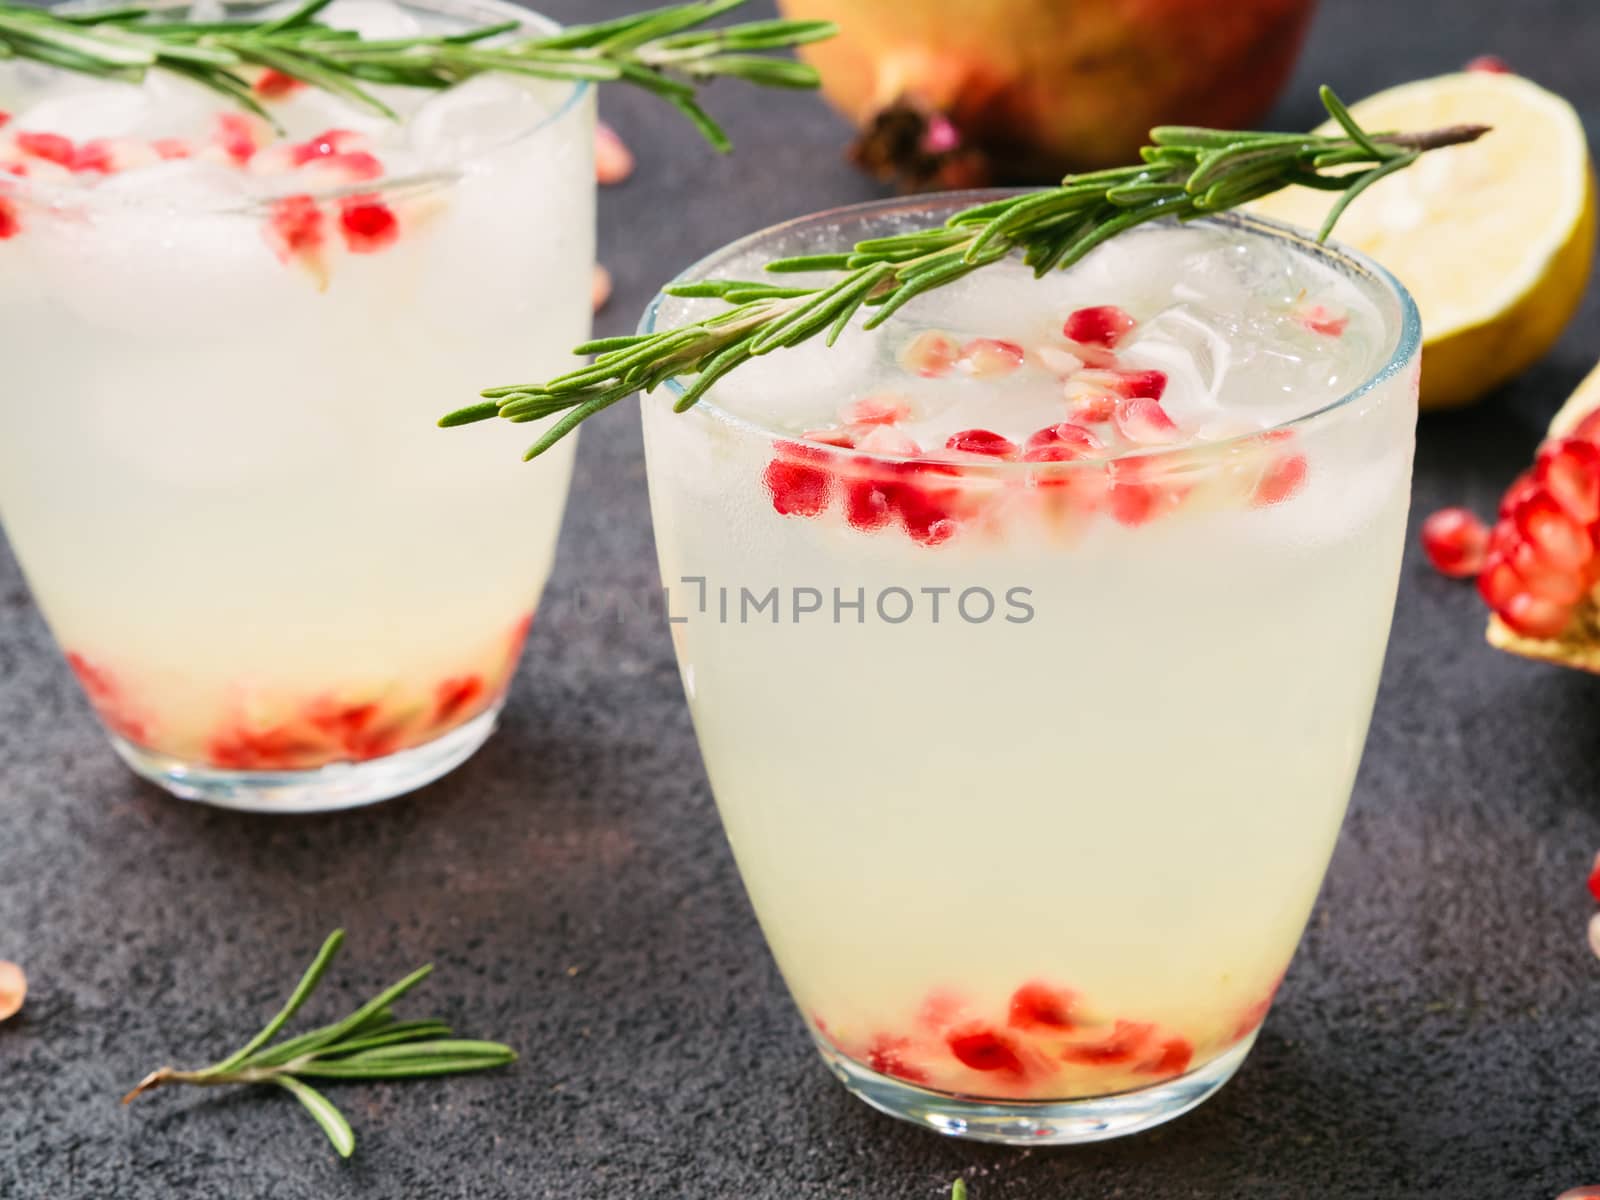 white sangria with rosemary, pomegrante and lemon juice by fascinadora